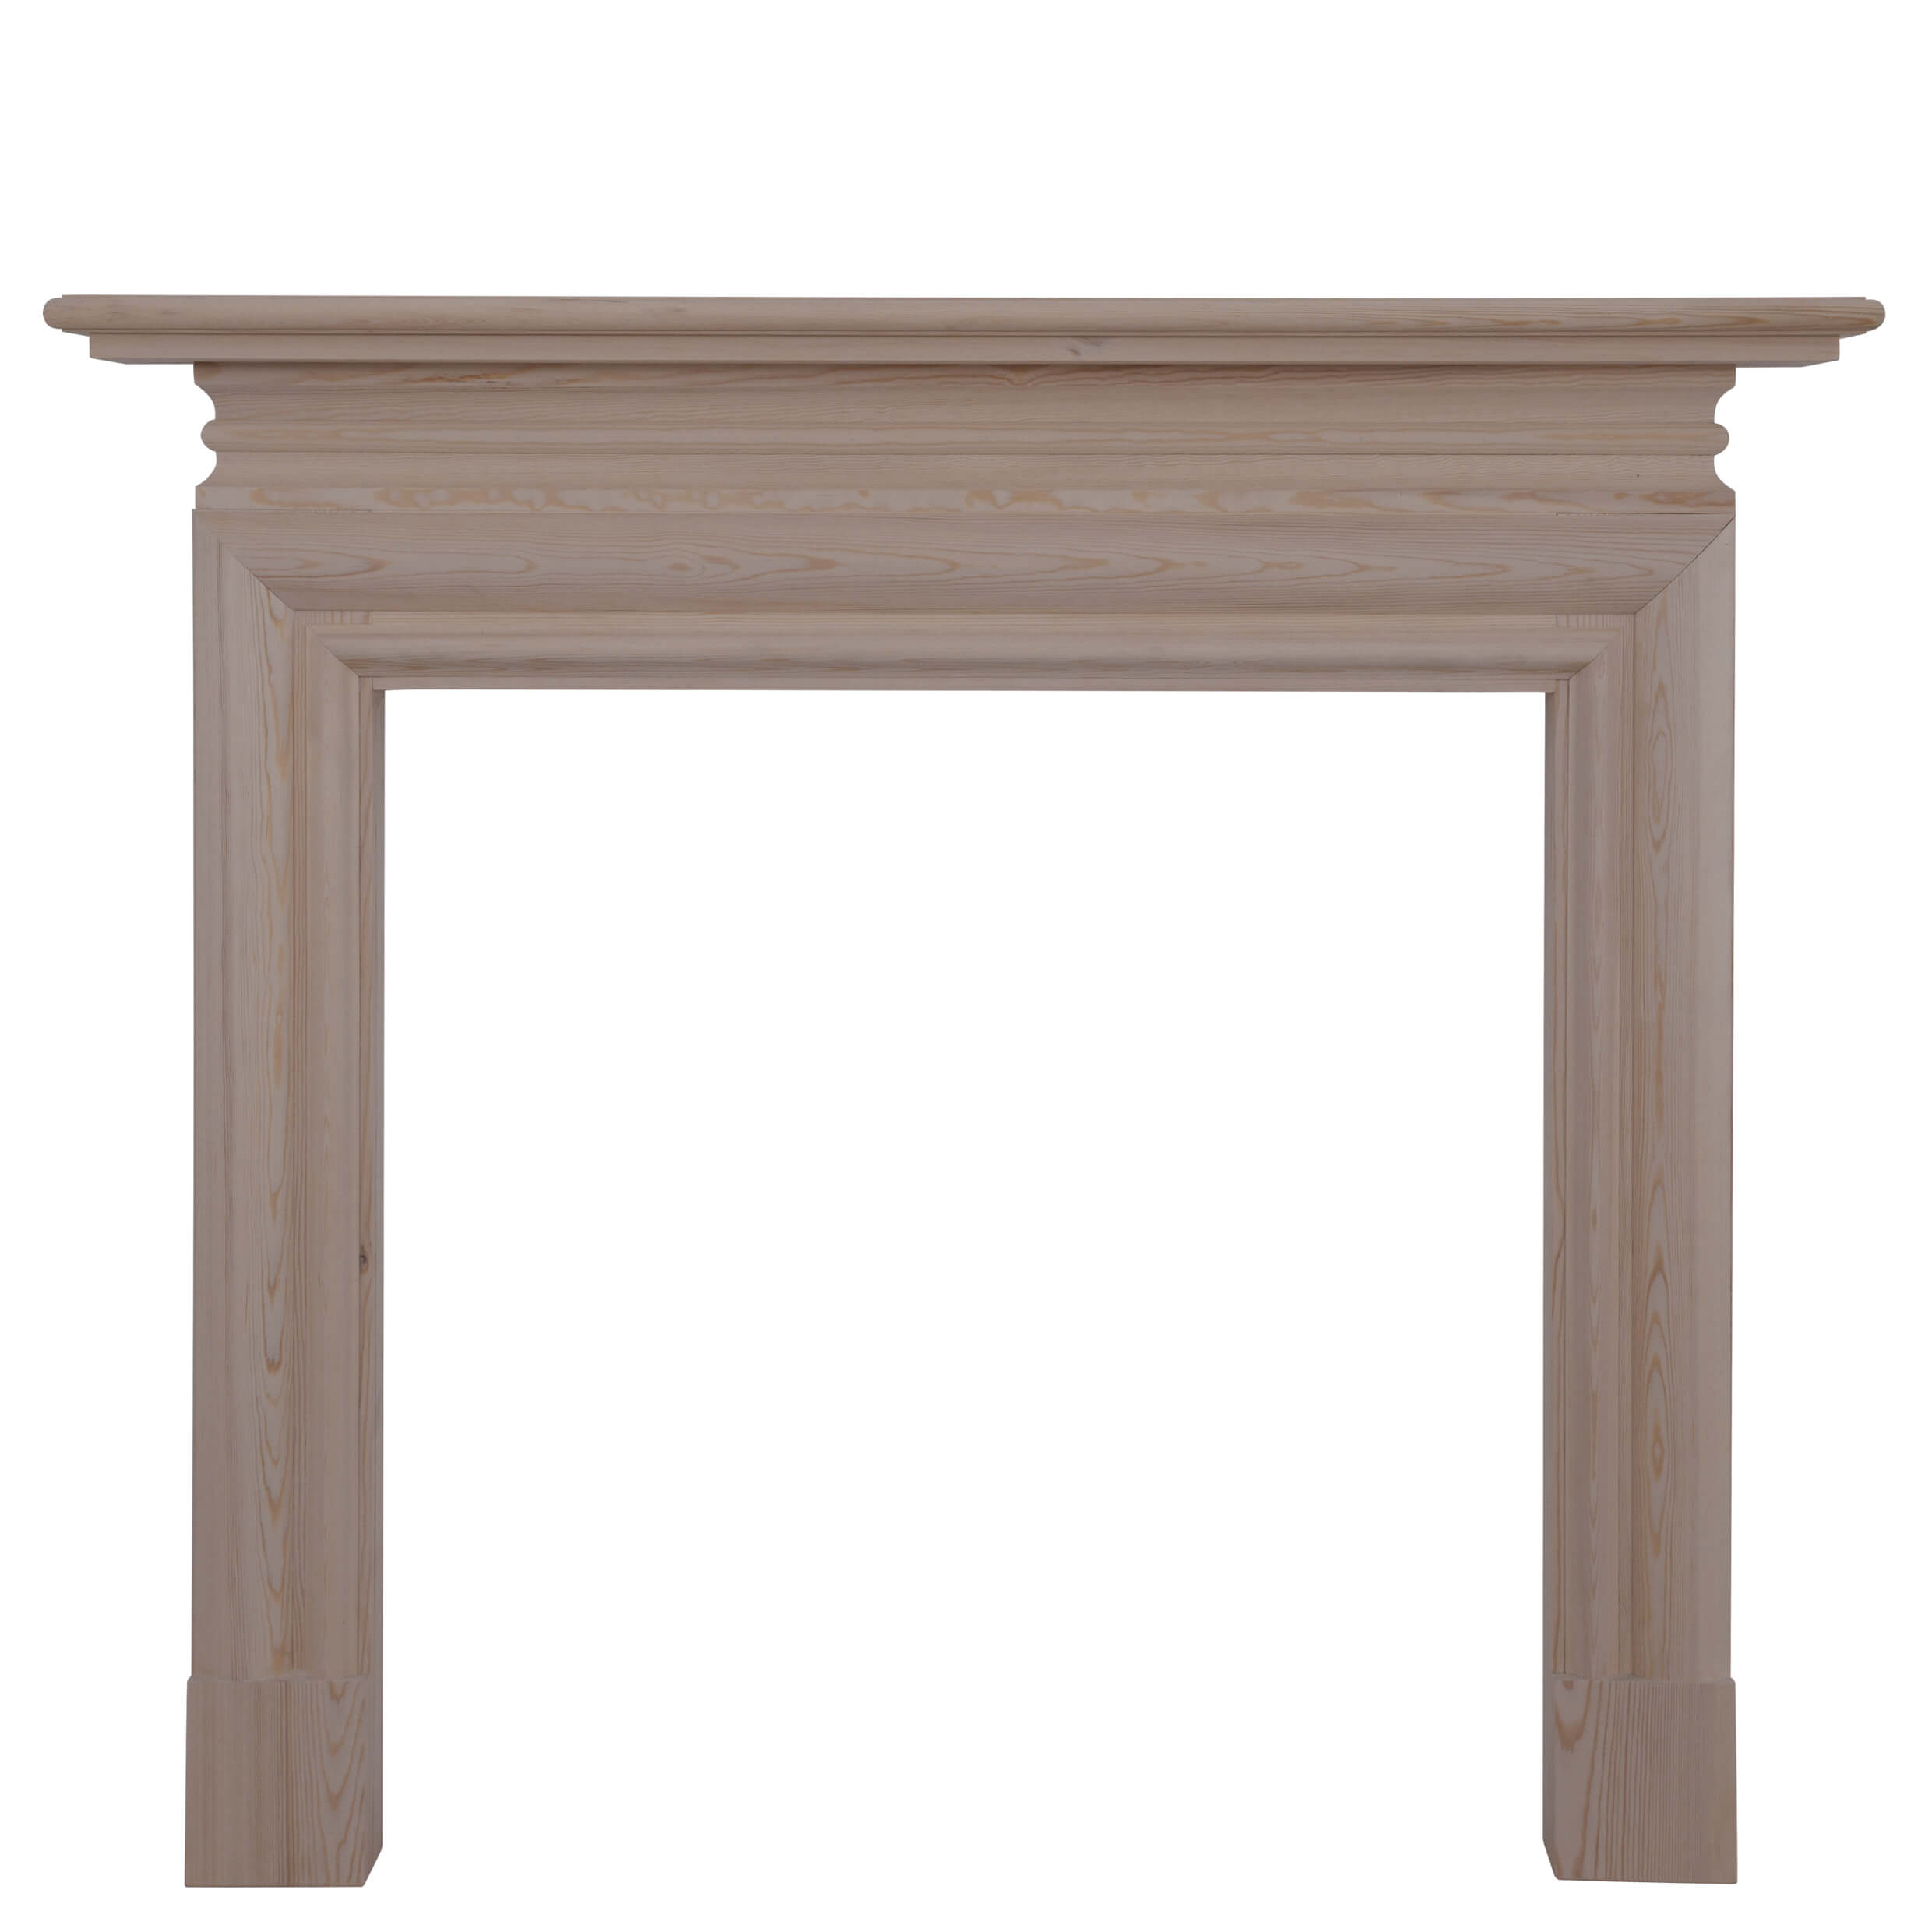 'The Wessex' Unwaxed Solid Pine Fire Surround - Warwick Reclamation